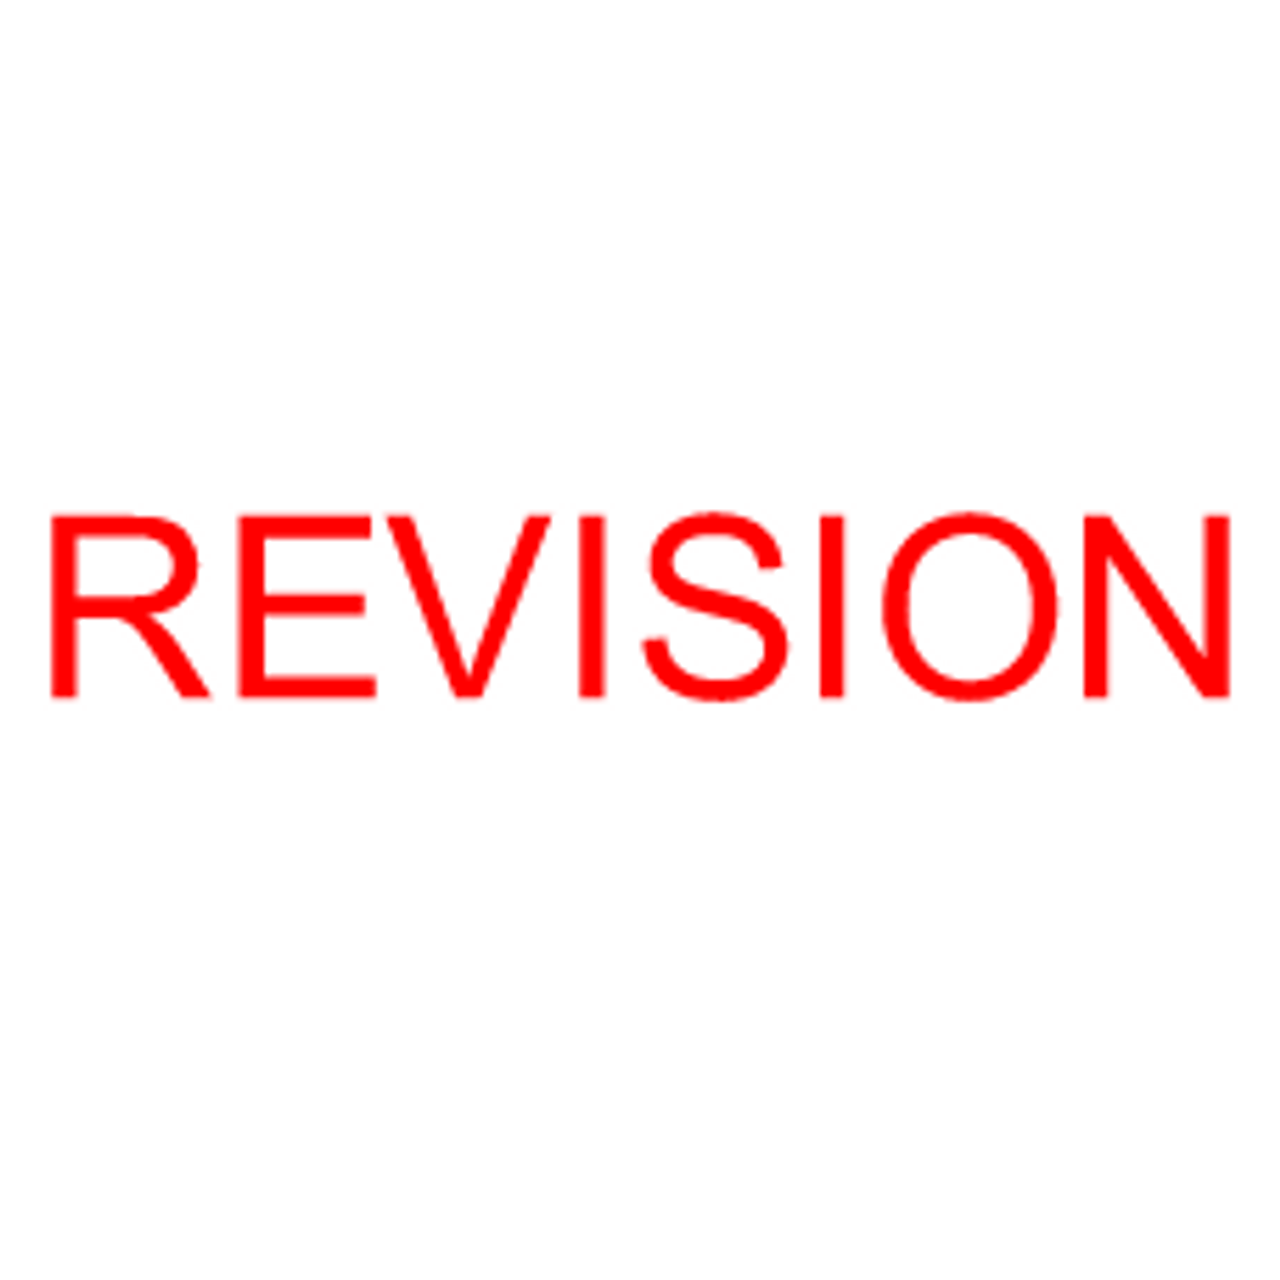 REVISION Rubber Stamp for office use self-inking